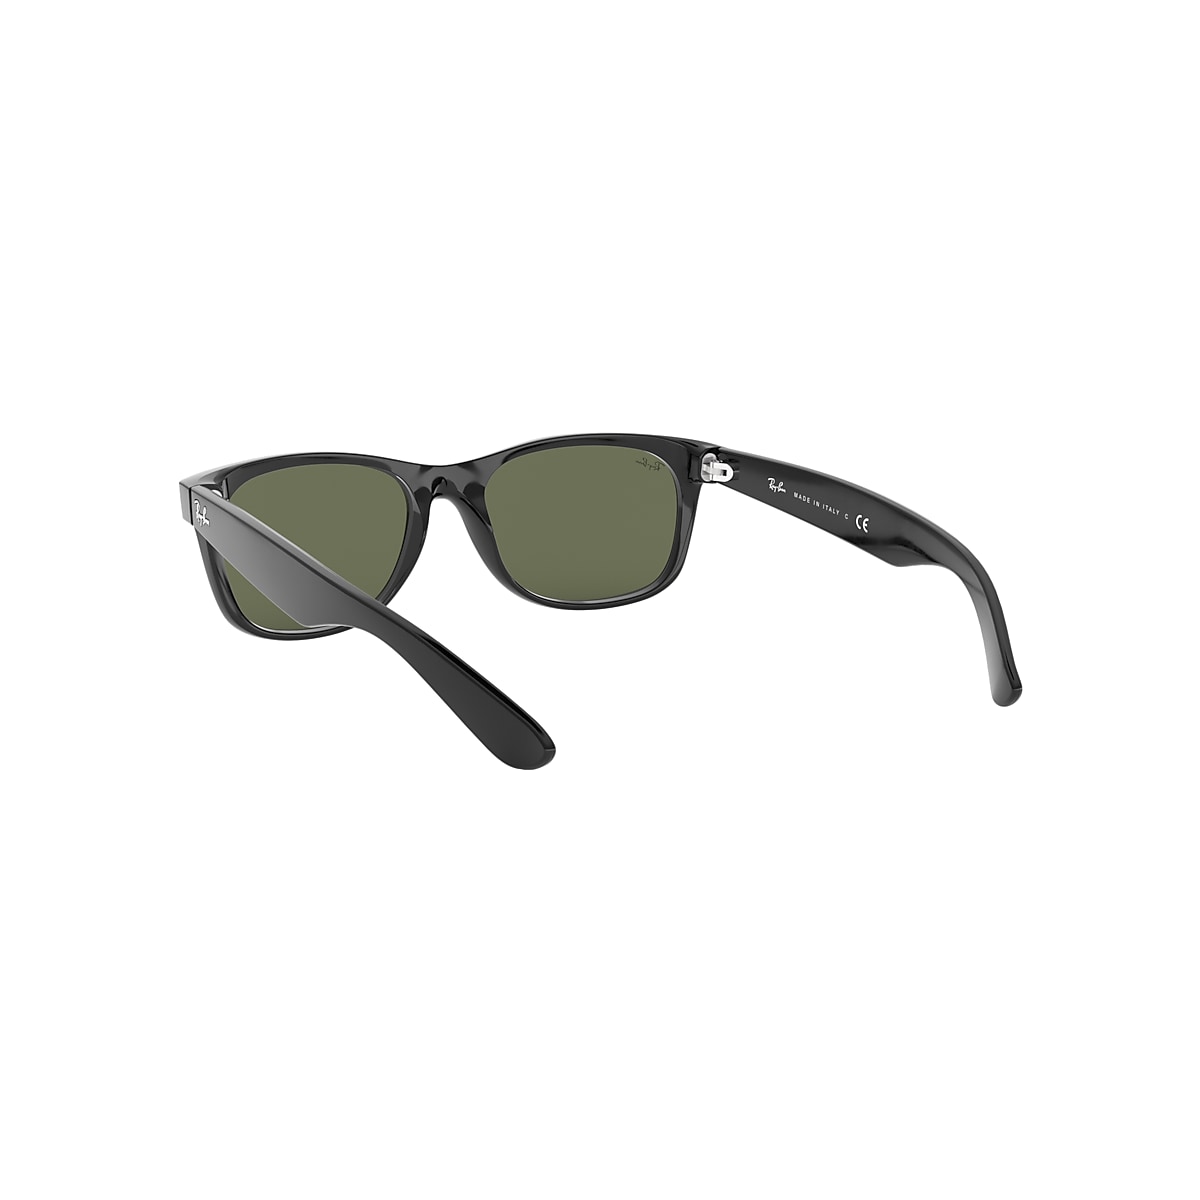 NEW WAYFARER CLASSIC Sunglasses in Black and Green - RB2132F | Ray 